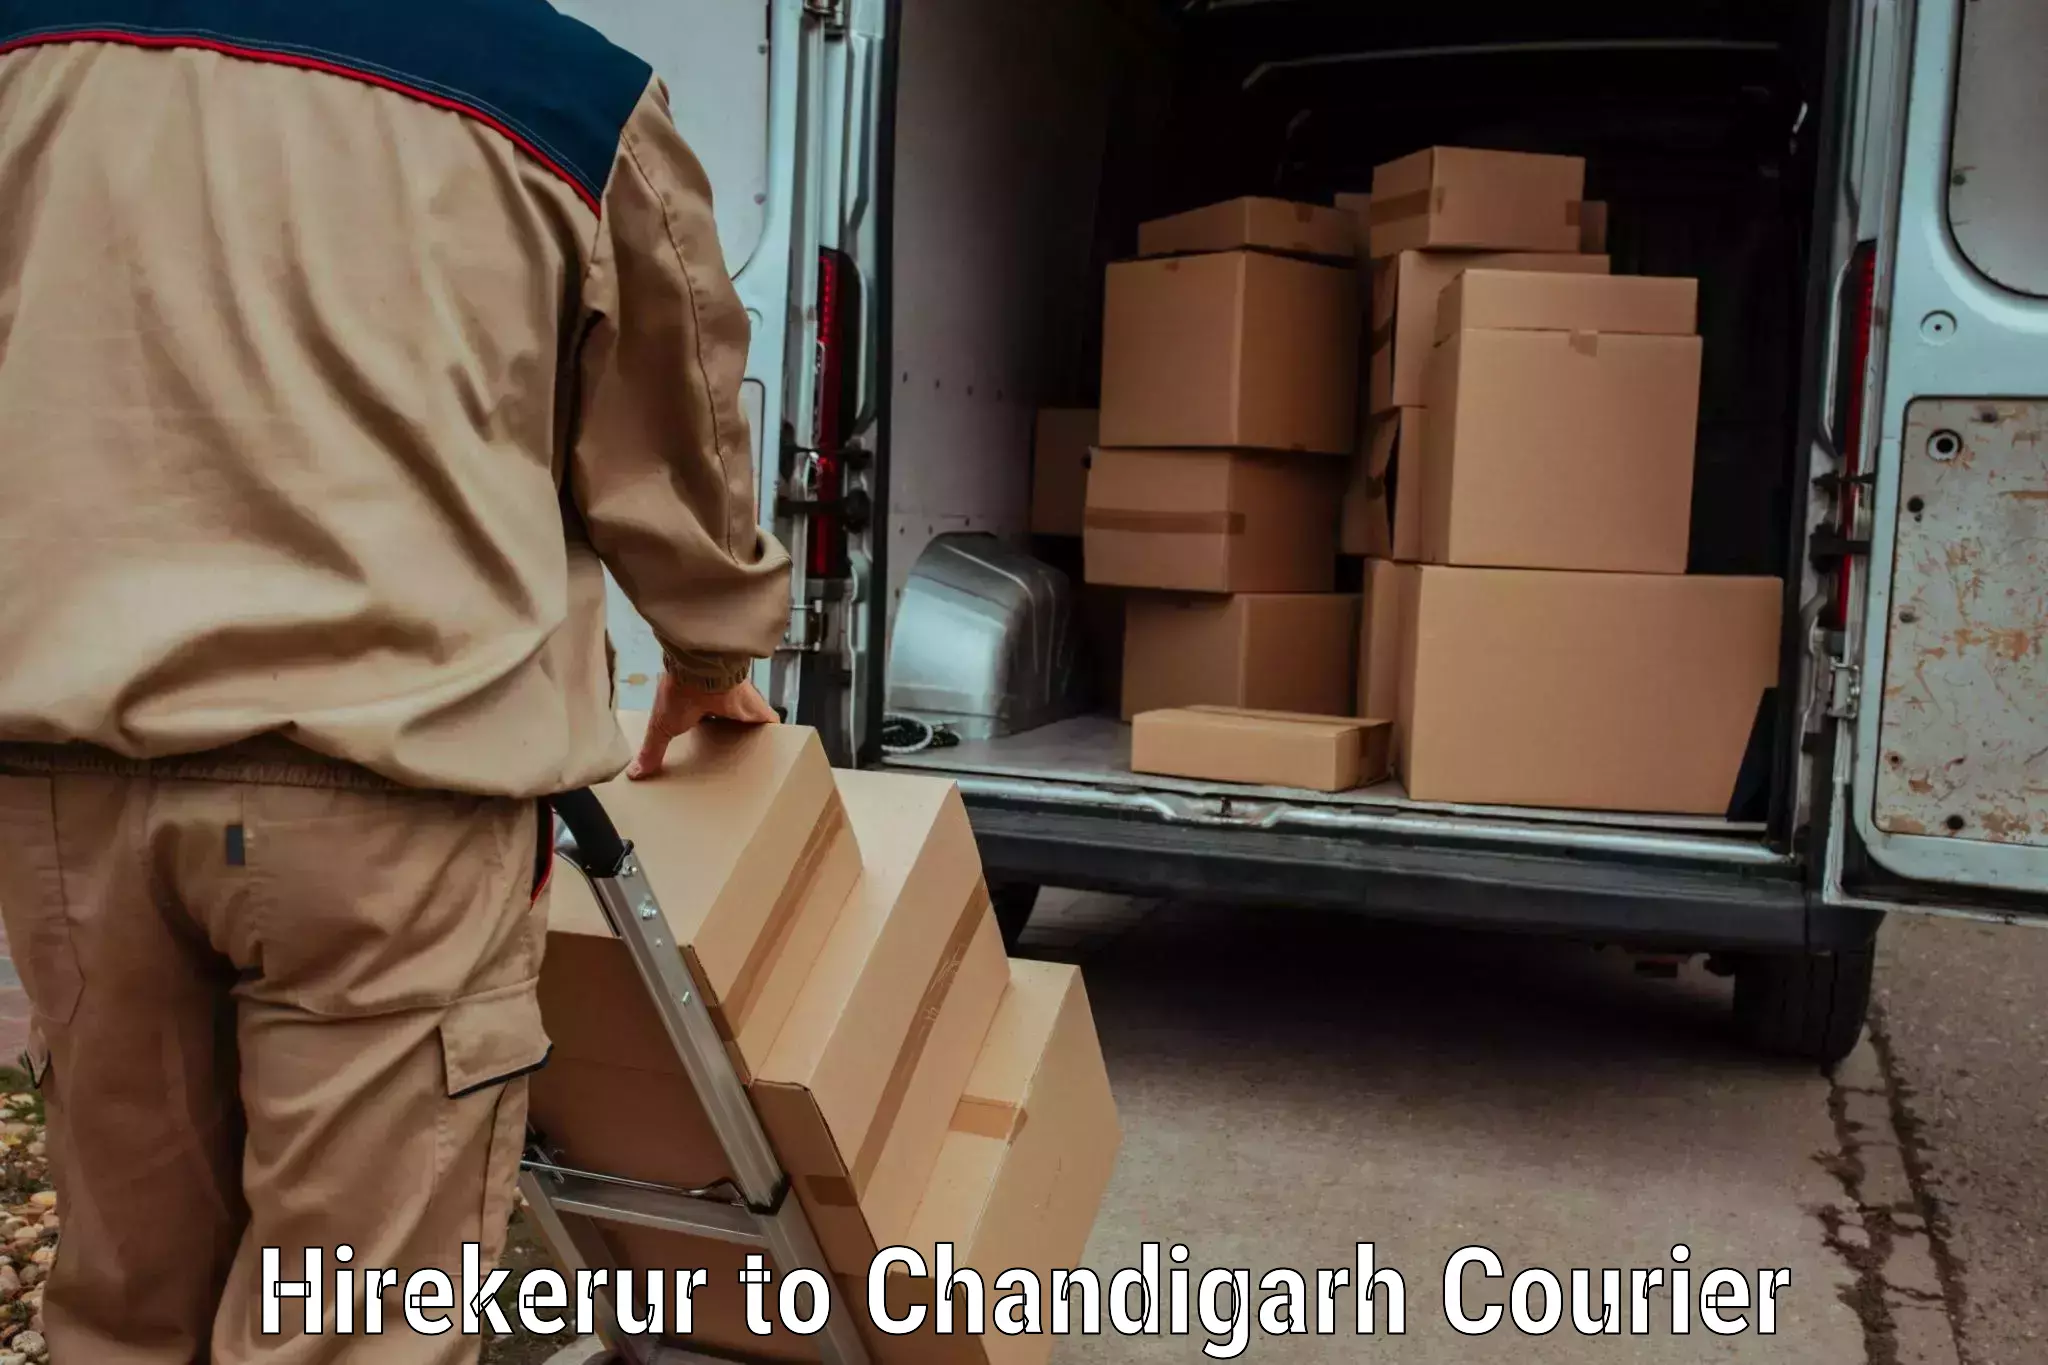 On-call courier service Hirekerur to Chandigarh